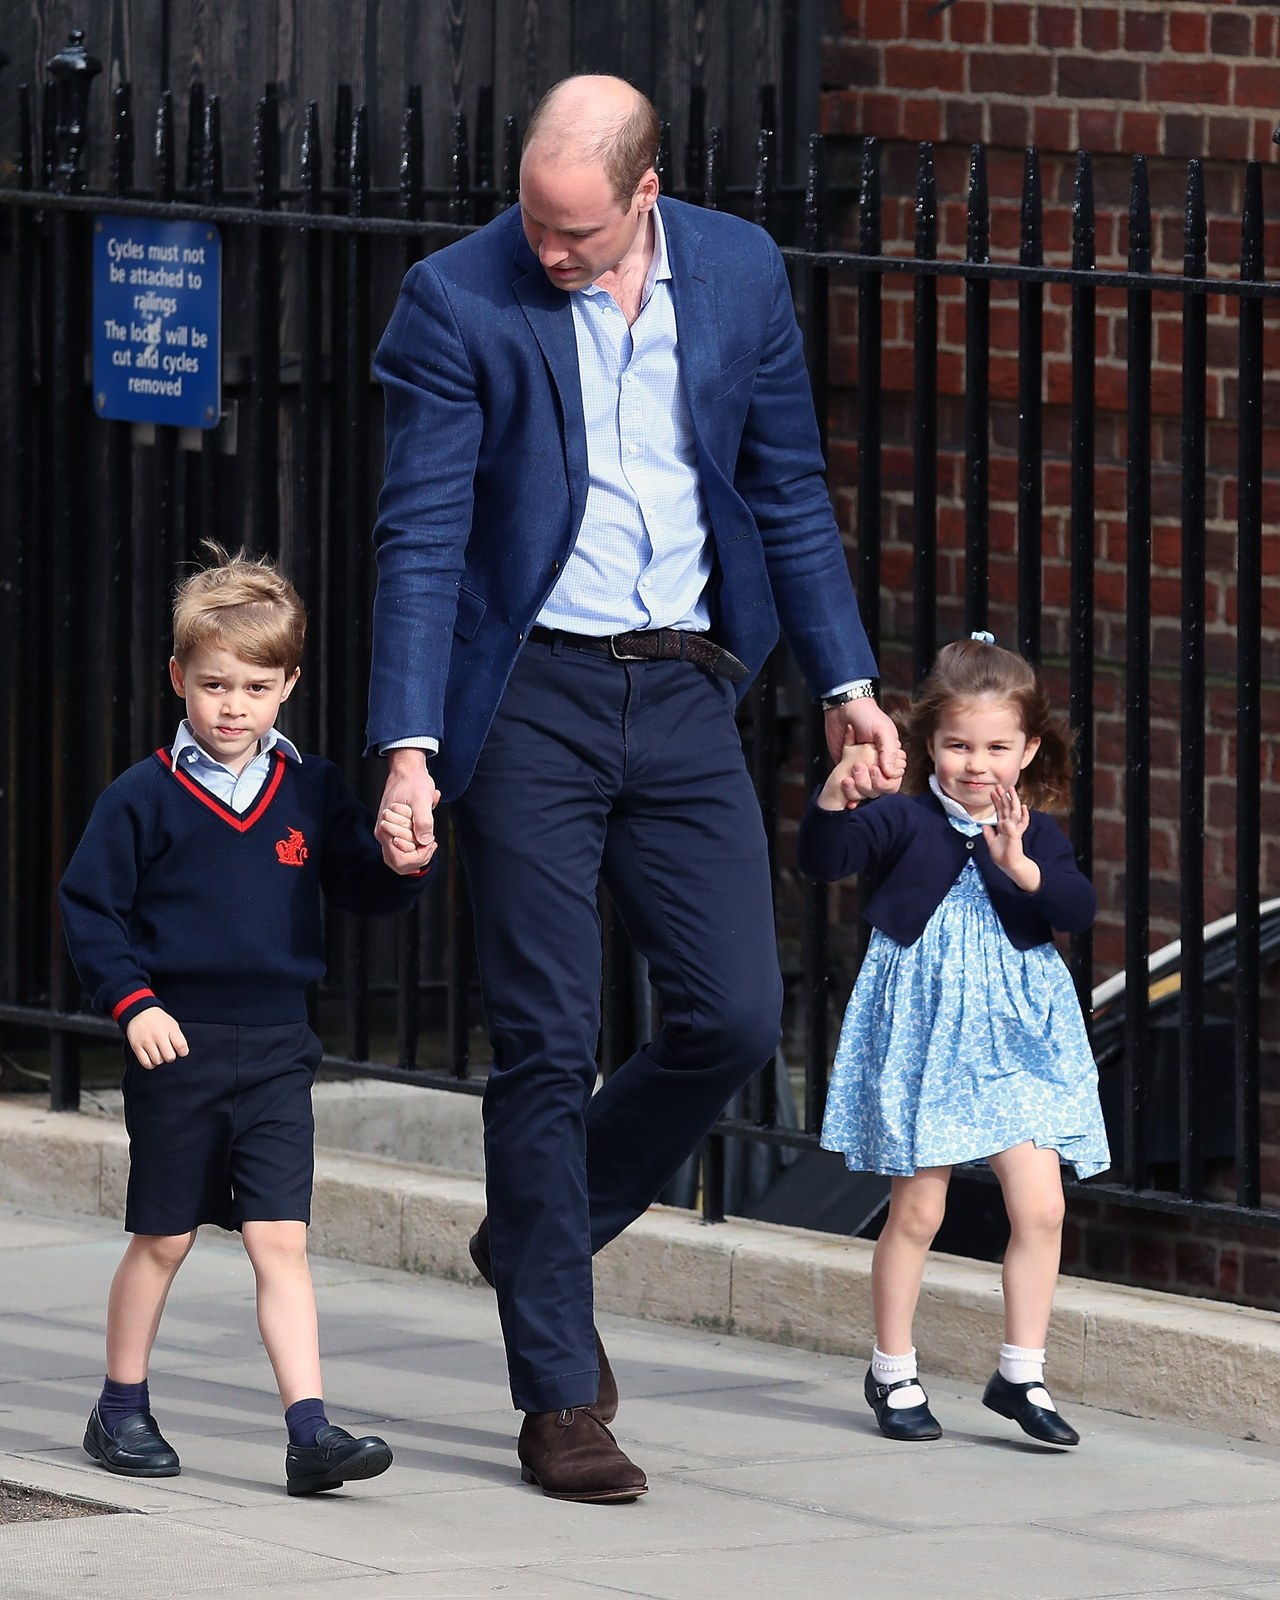 The Duke & Duchess Of Cambridge Depart The Lindo Wing With Their New Baby Boy - April 23, 2018